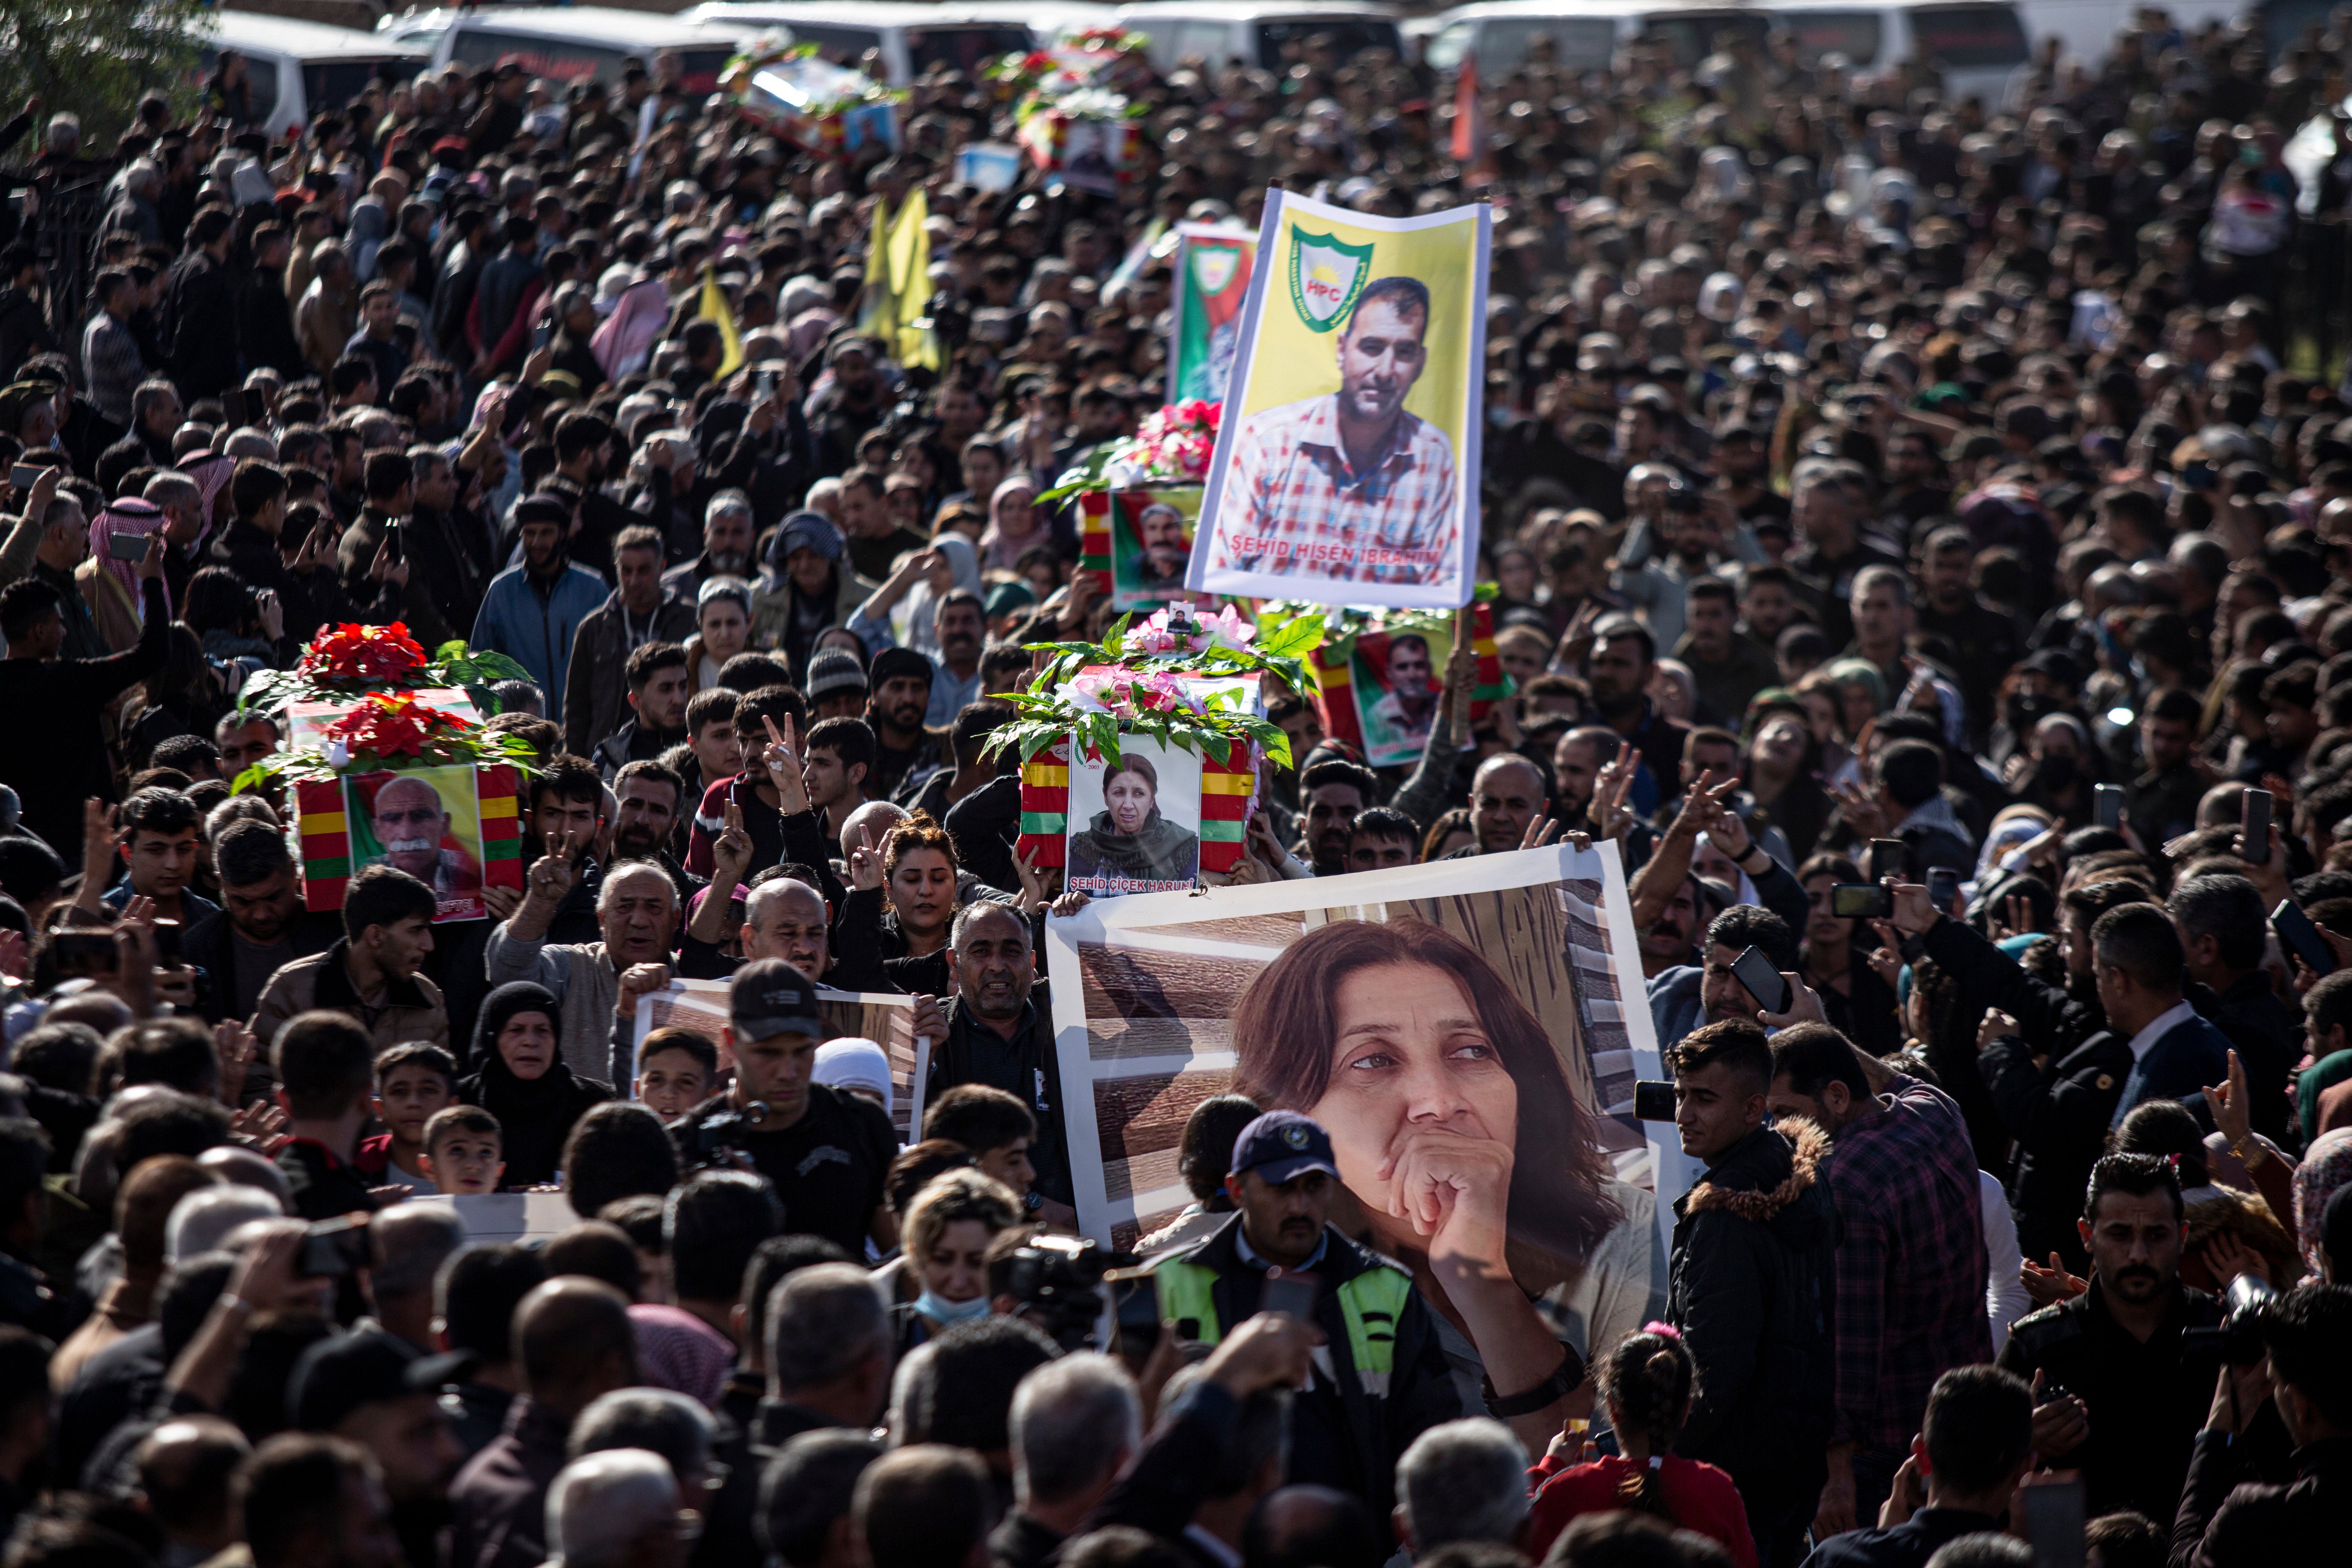 Syrian Kurds attend a funeral of people killed in Turkish airstrikes in the village of al-Malikiyah, northern Syria